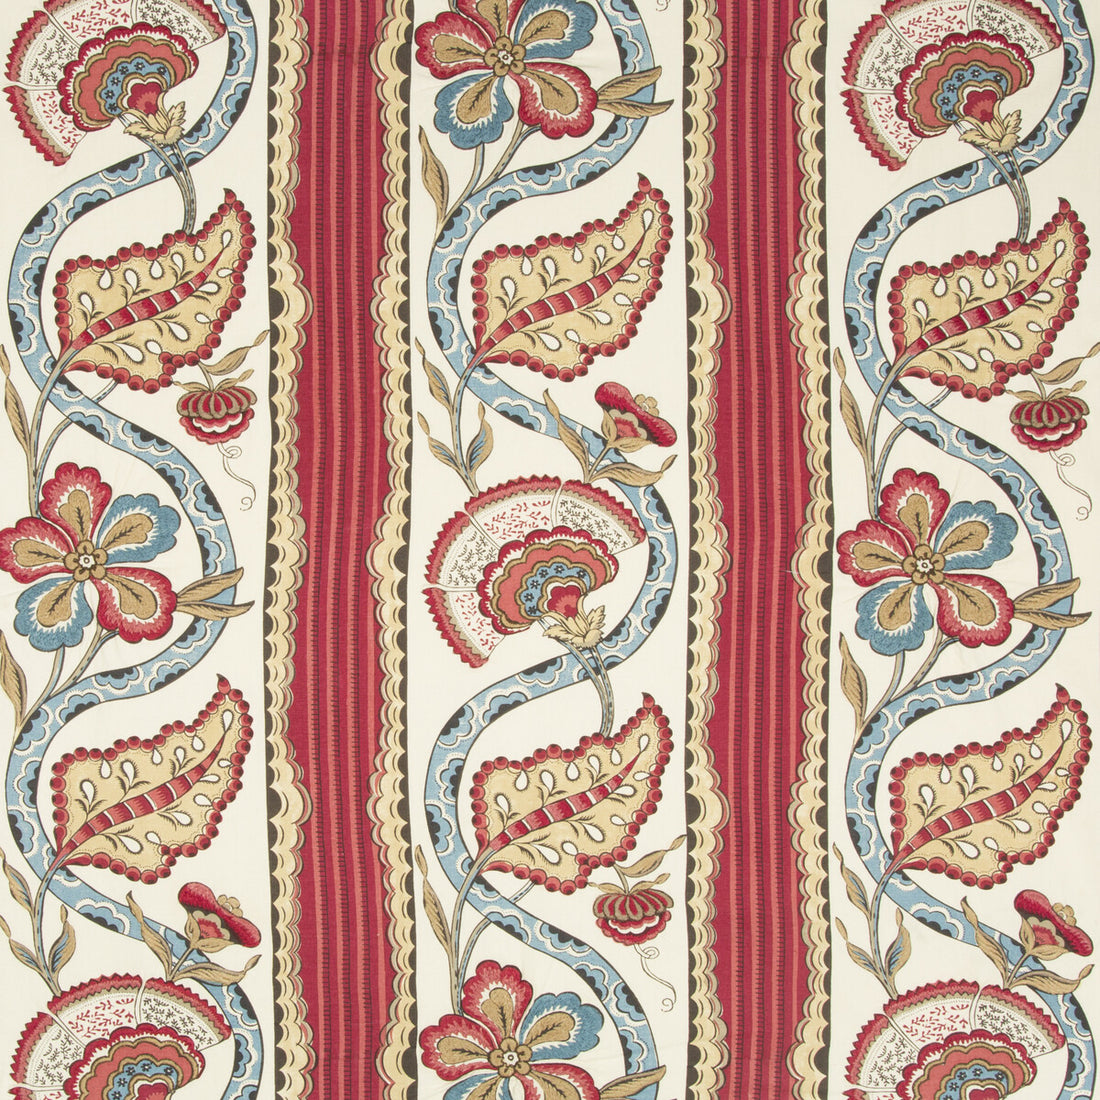 Gautier Print fabric in cranberry color - pattern 8017113.19.0 - by Brunschwig &amp; Fils in the Le Parnasse collection